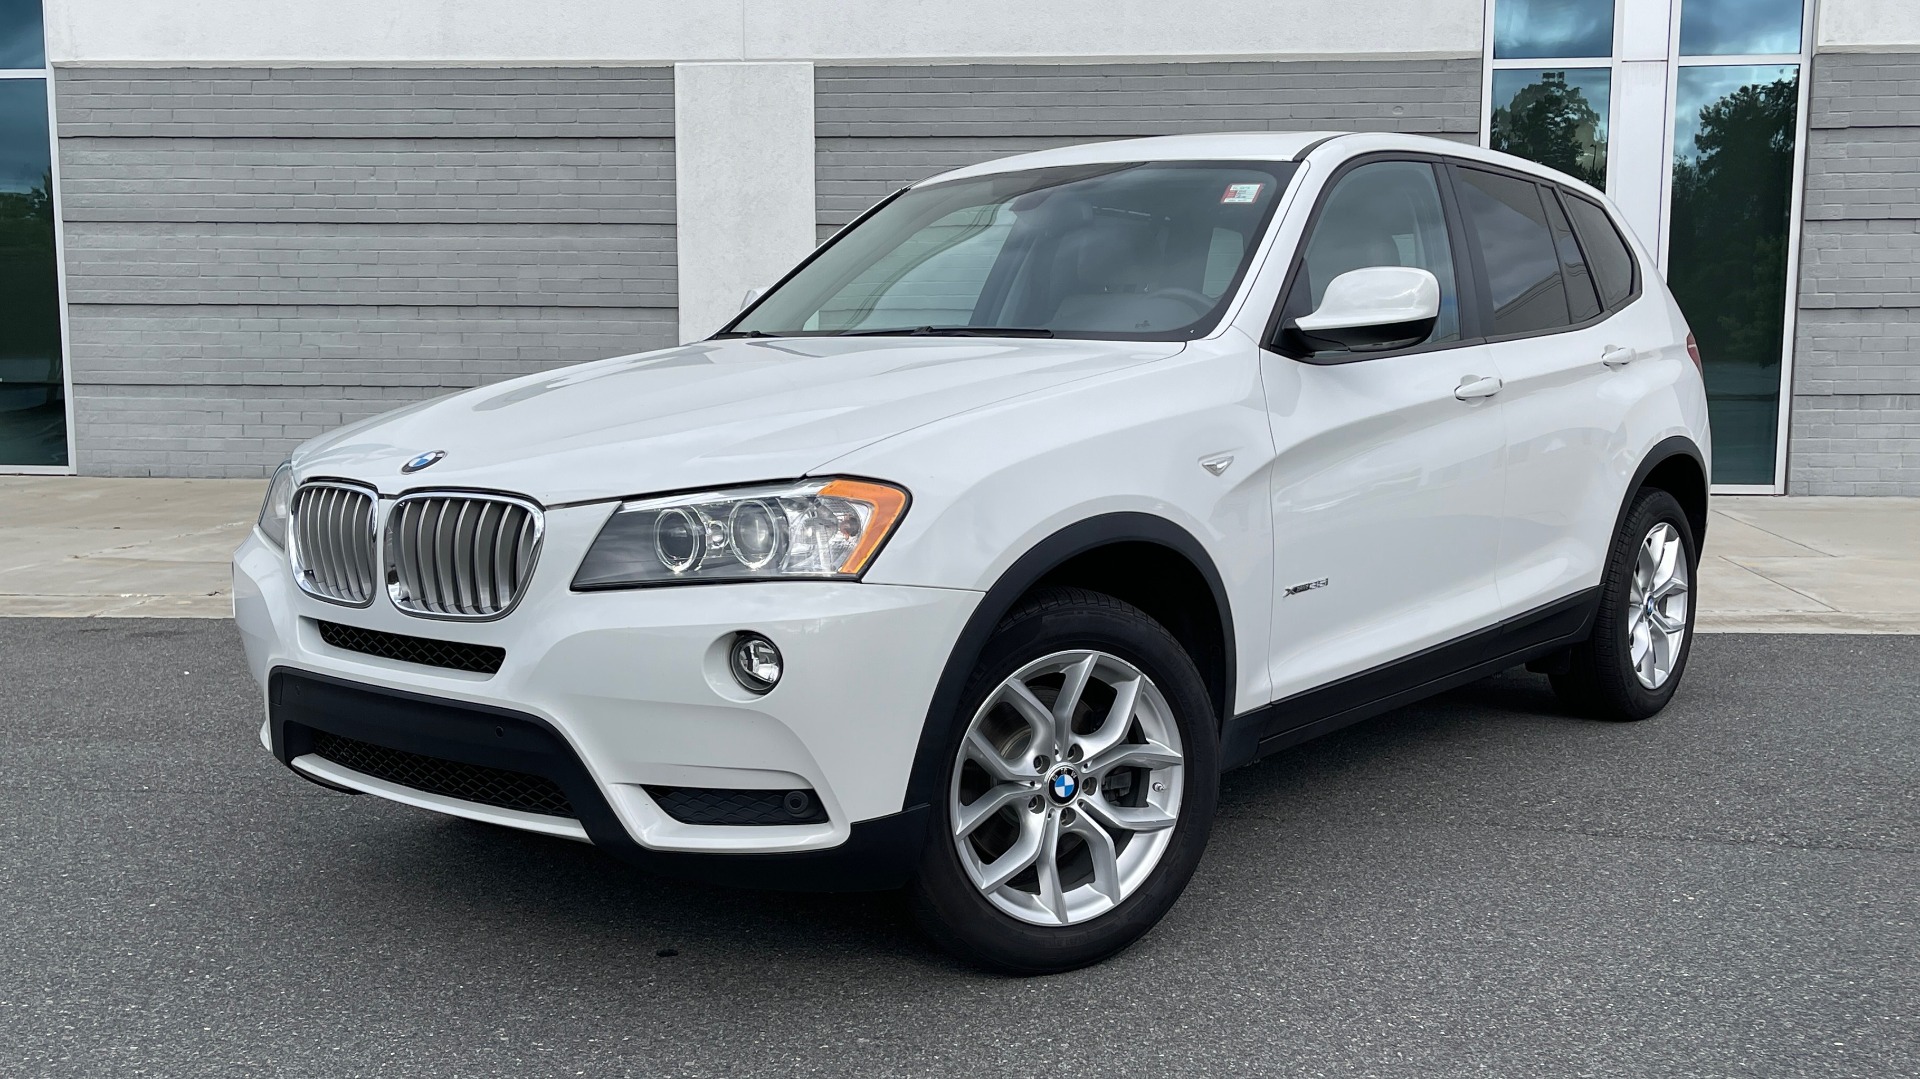 Used 2013 BMW X3 XDRIVE35I PREMIUM / TECHNOLOGY / COLD WTHR / REARVIEW for sale Sold at Formula Imports in Charlotte NC 28227 1